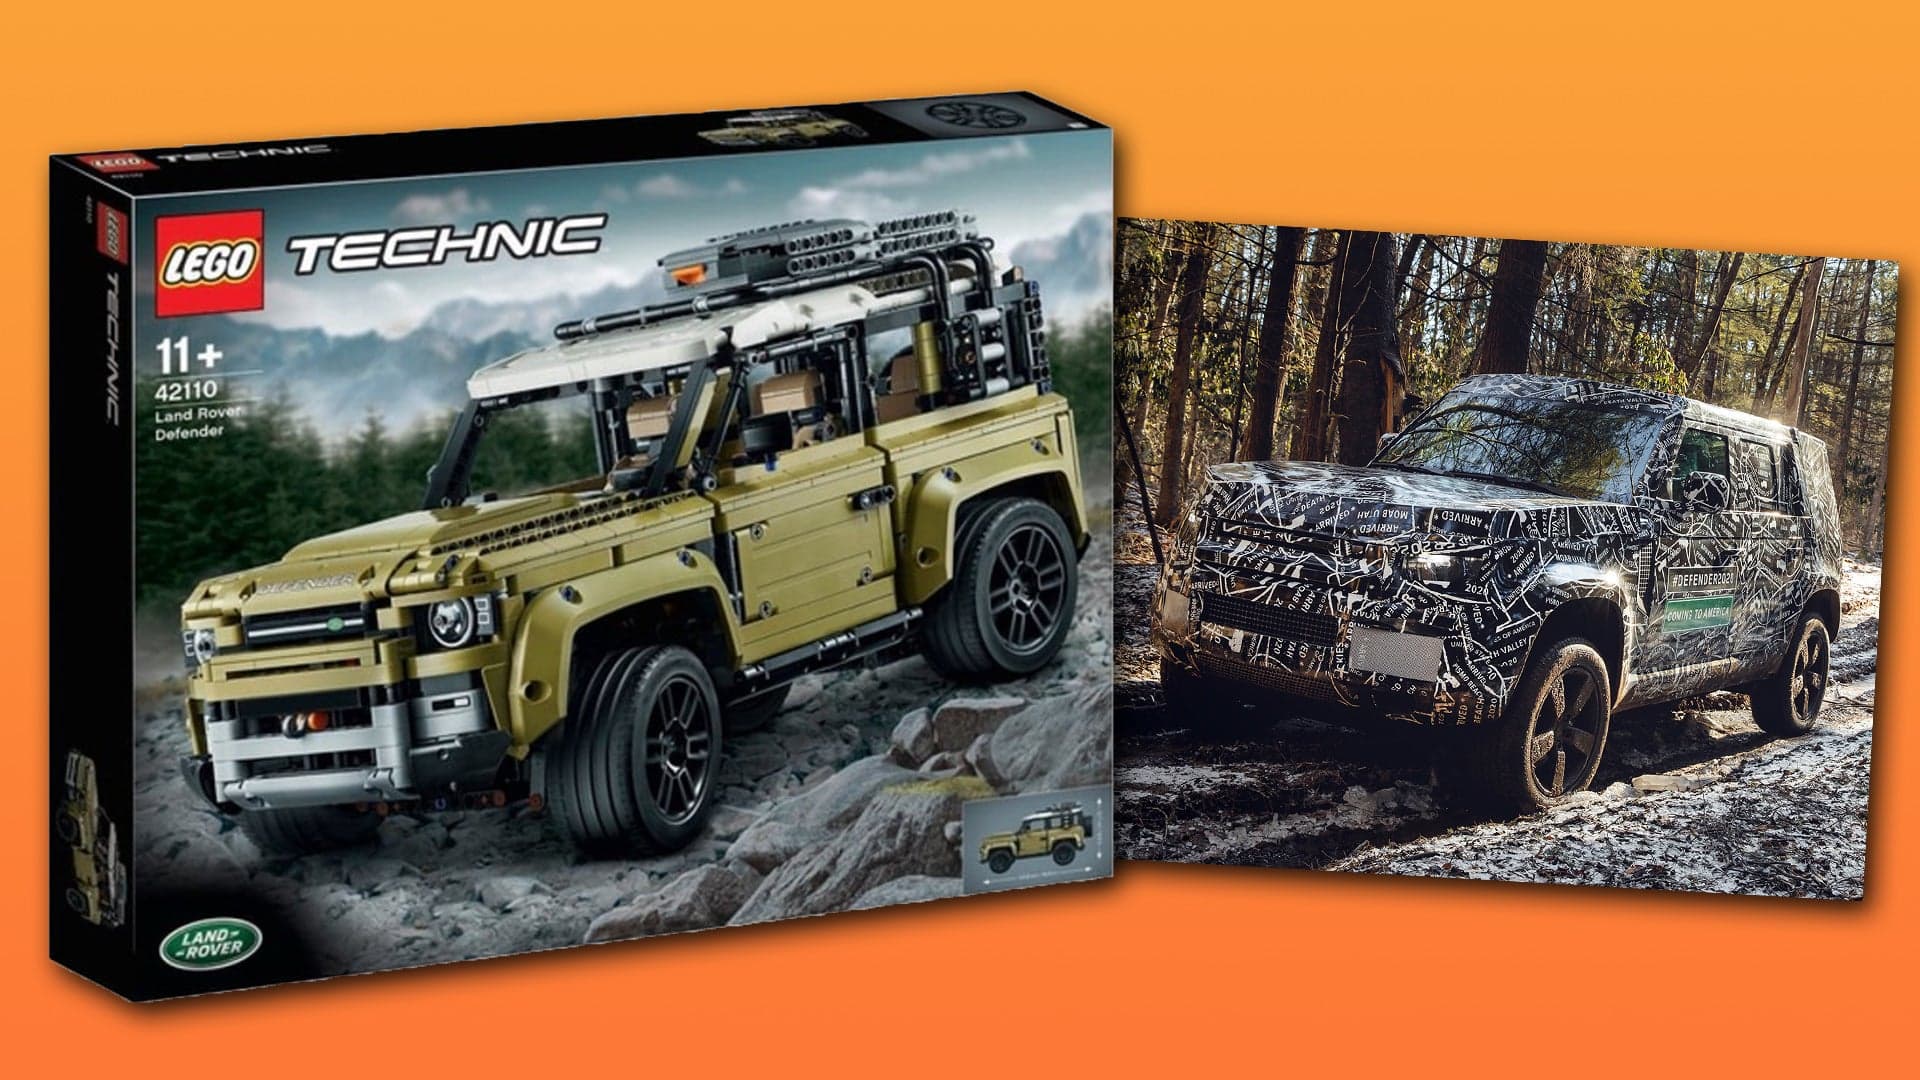 This New Lego Kit Might Have Leaked the 2020 Land Rover Defender